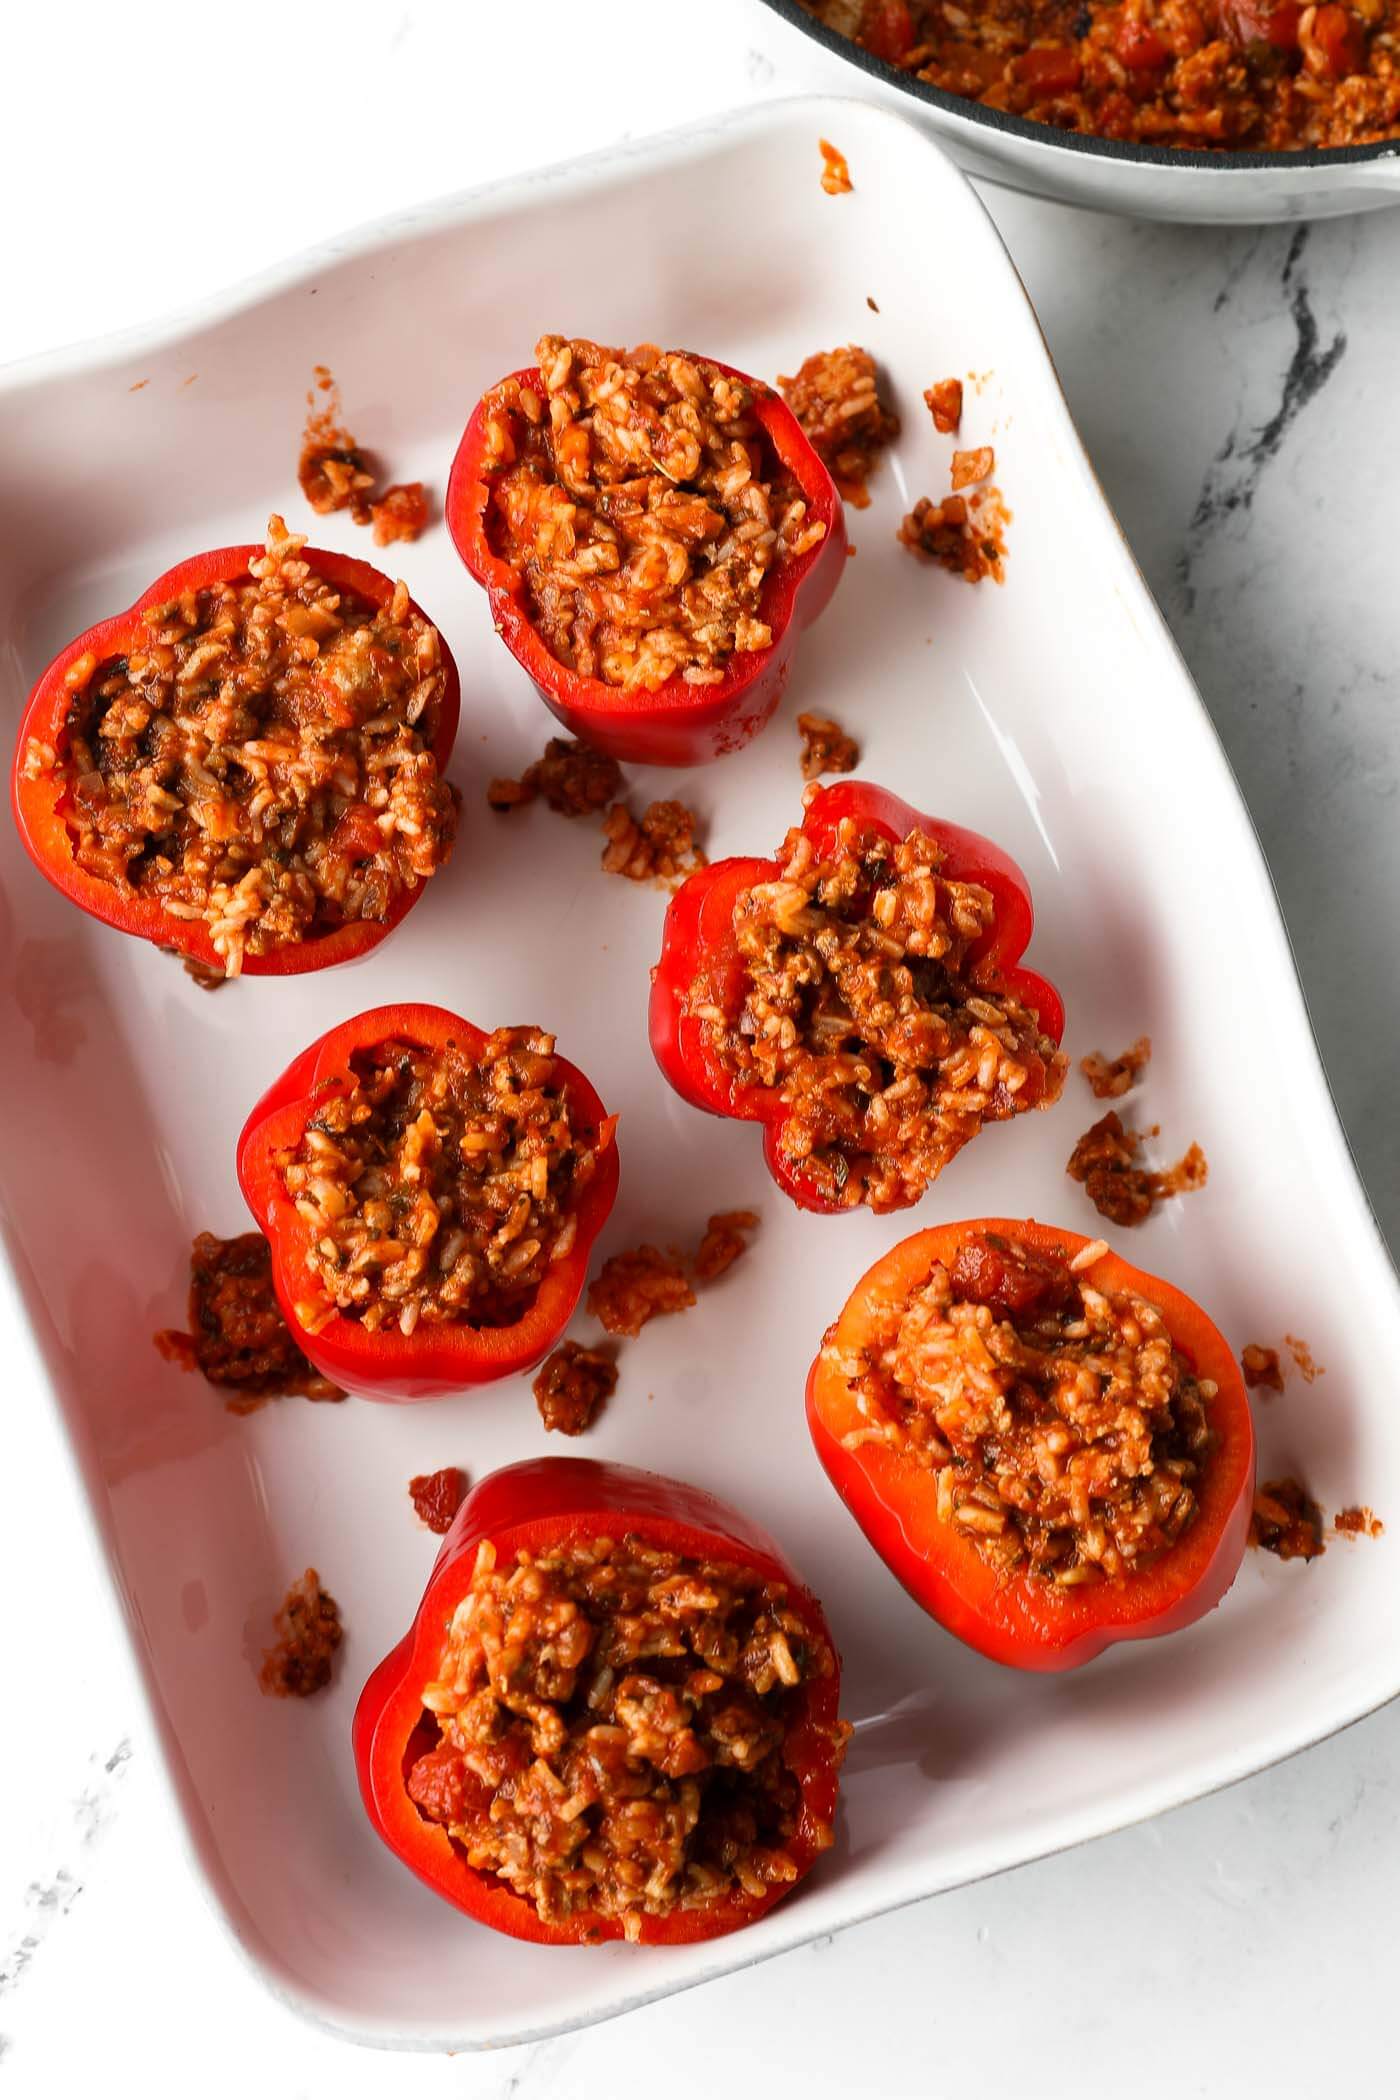 Six stuffed red bell peppers in a baking dish before they get cooked in the oven.